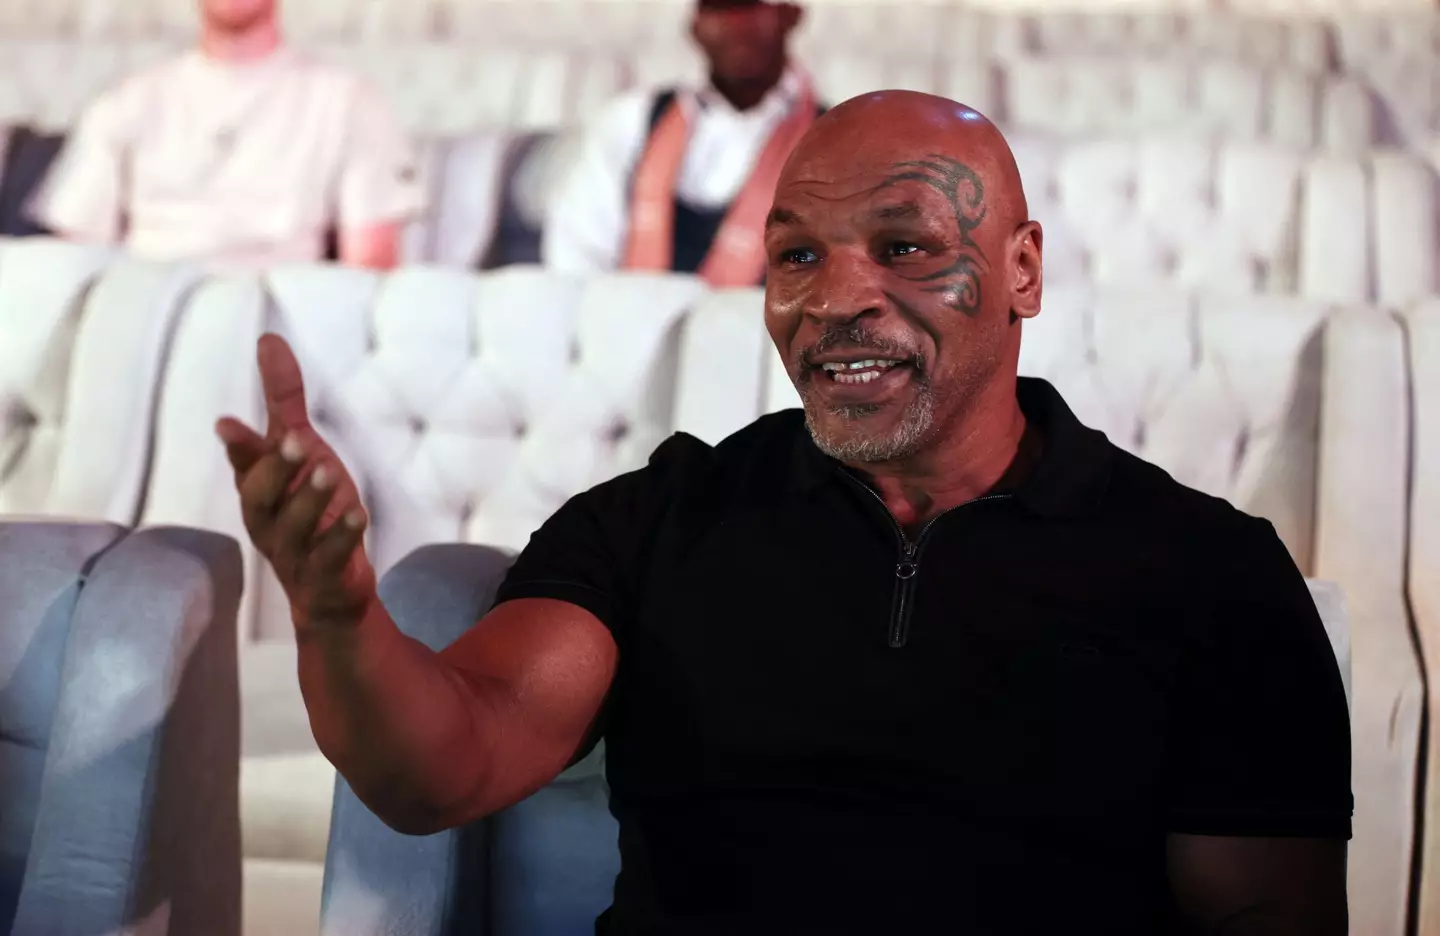 Mike Tyson was 'petrified' of his trainer. Image: Alamy